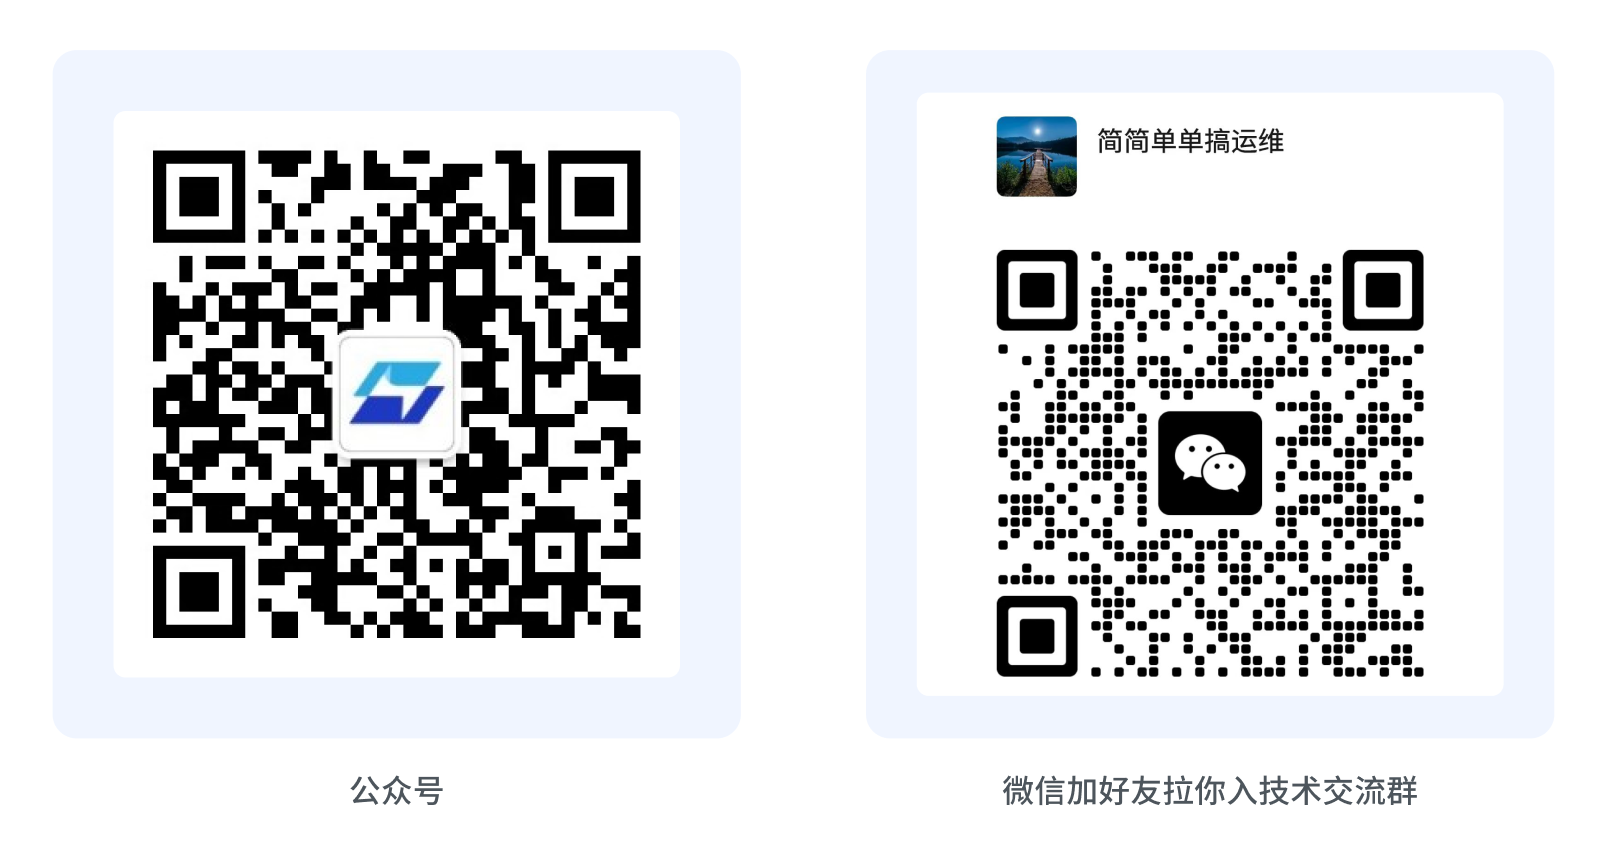 Wechat Official Account: 维易科技OneOps